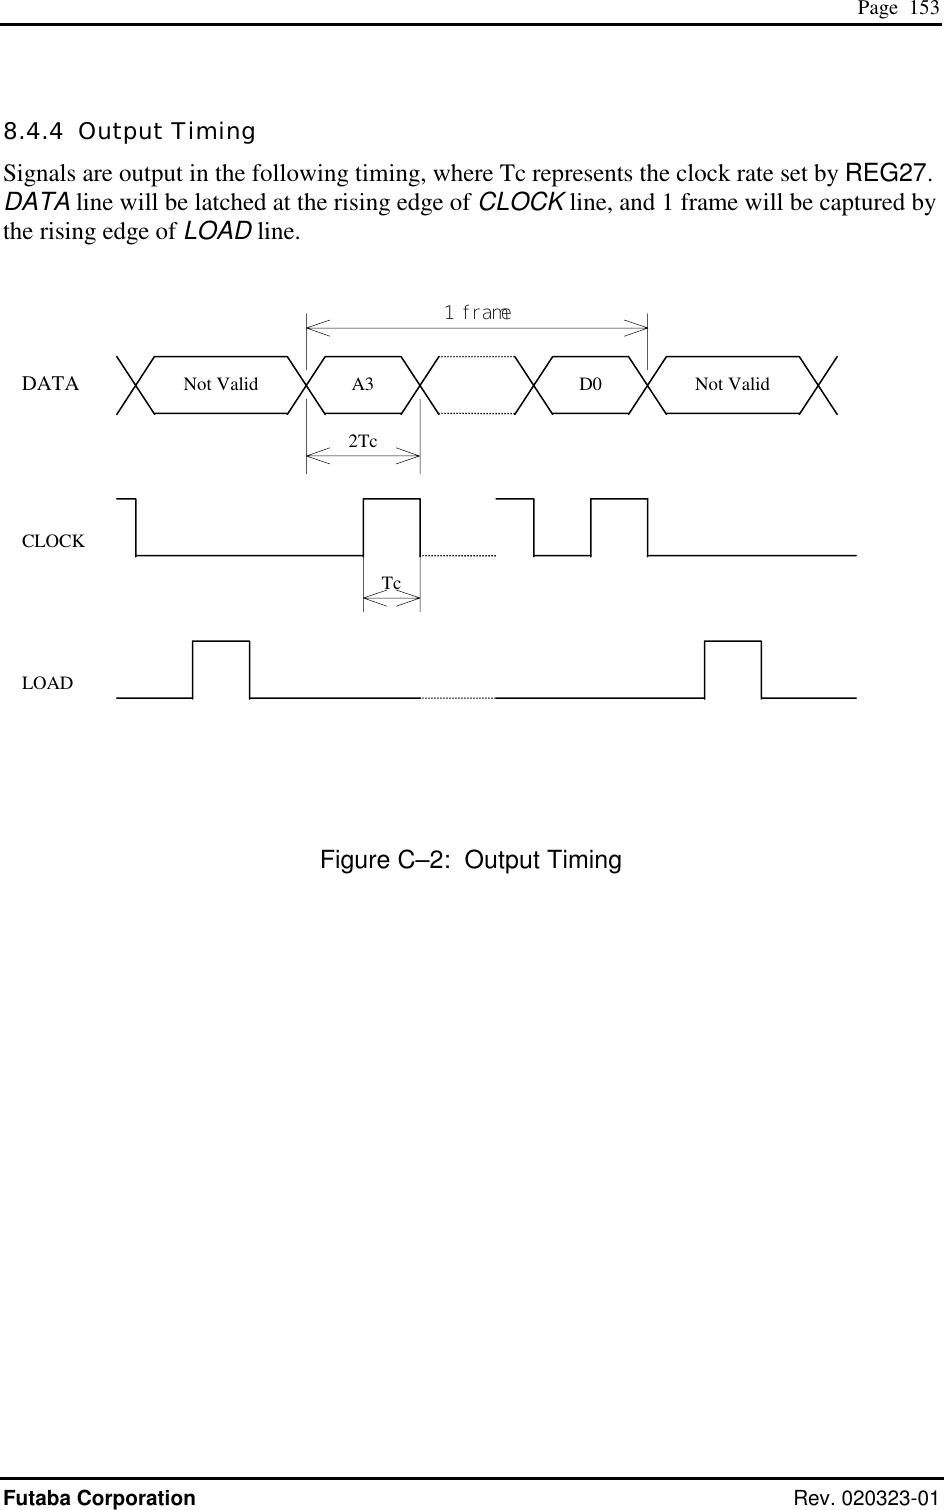  Page  153 Futaba Corporation Rev. 020323-01 8.4.4  Output Timing Signals are output in the following timing, where Tc represents the clock rate set by REG27. DATA line will be latched at the rising edge of CLOCK line, and 1 frame will be captured by the rising edge of LOAD line.                     Figure C–2:  Output Timing Not Valid  Not Valid A3 D0 DATA CLOCK LOAD 2Tc Tc 1 frame 